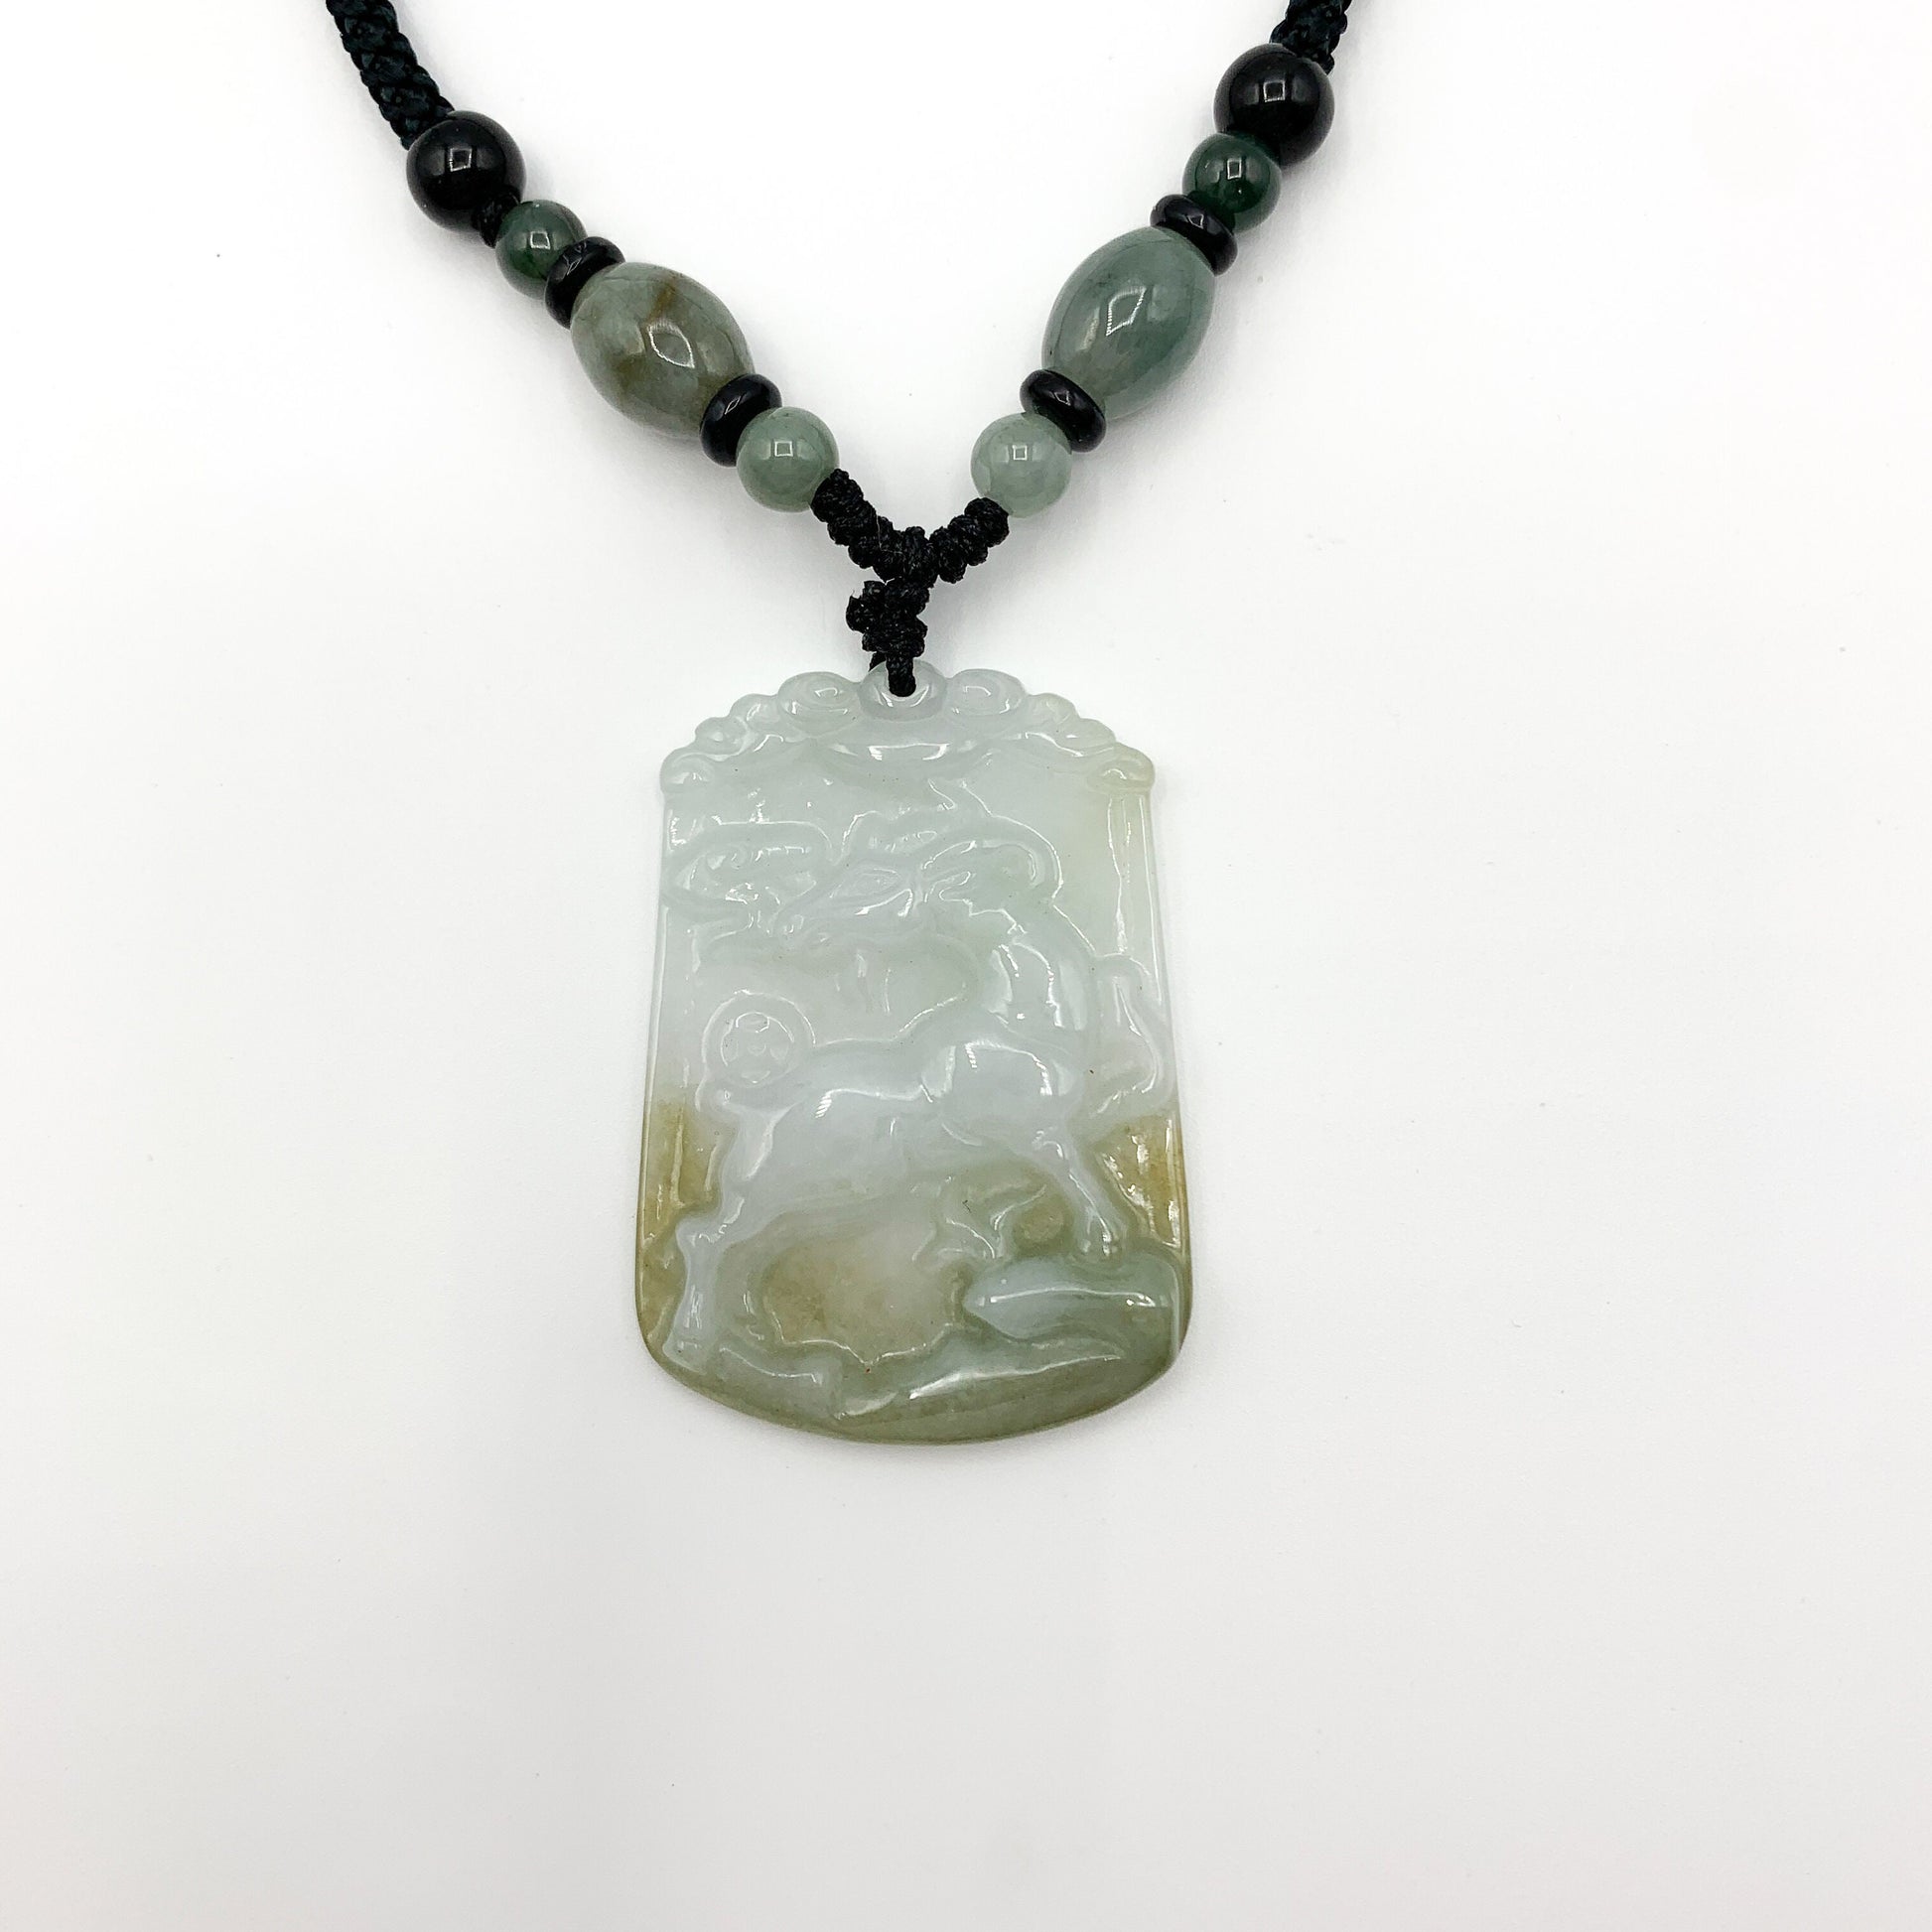 Jadeite Jade Sheep Goat Ram Chinese Zodiac Carved Pendant Necklace, YW-0321-1646061640 - AriaDesignCollection